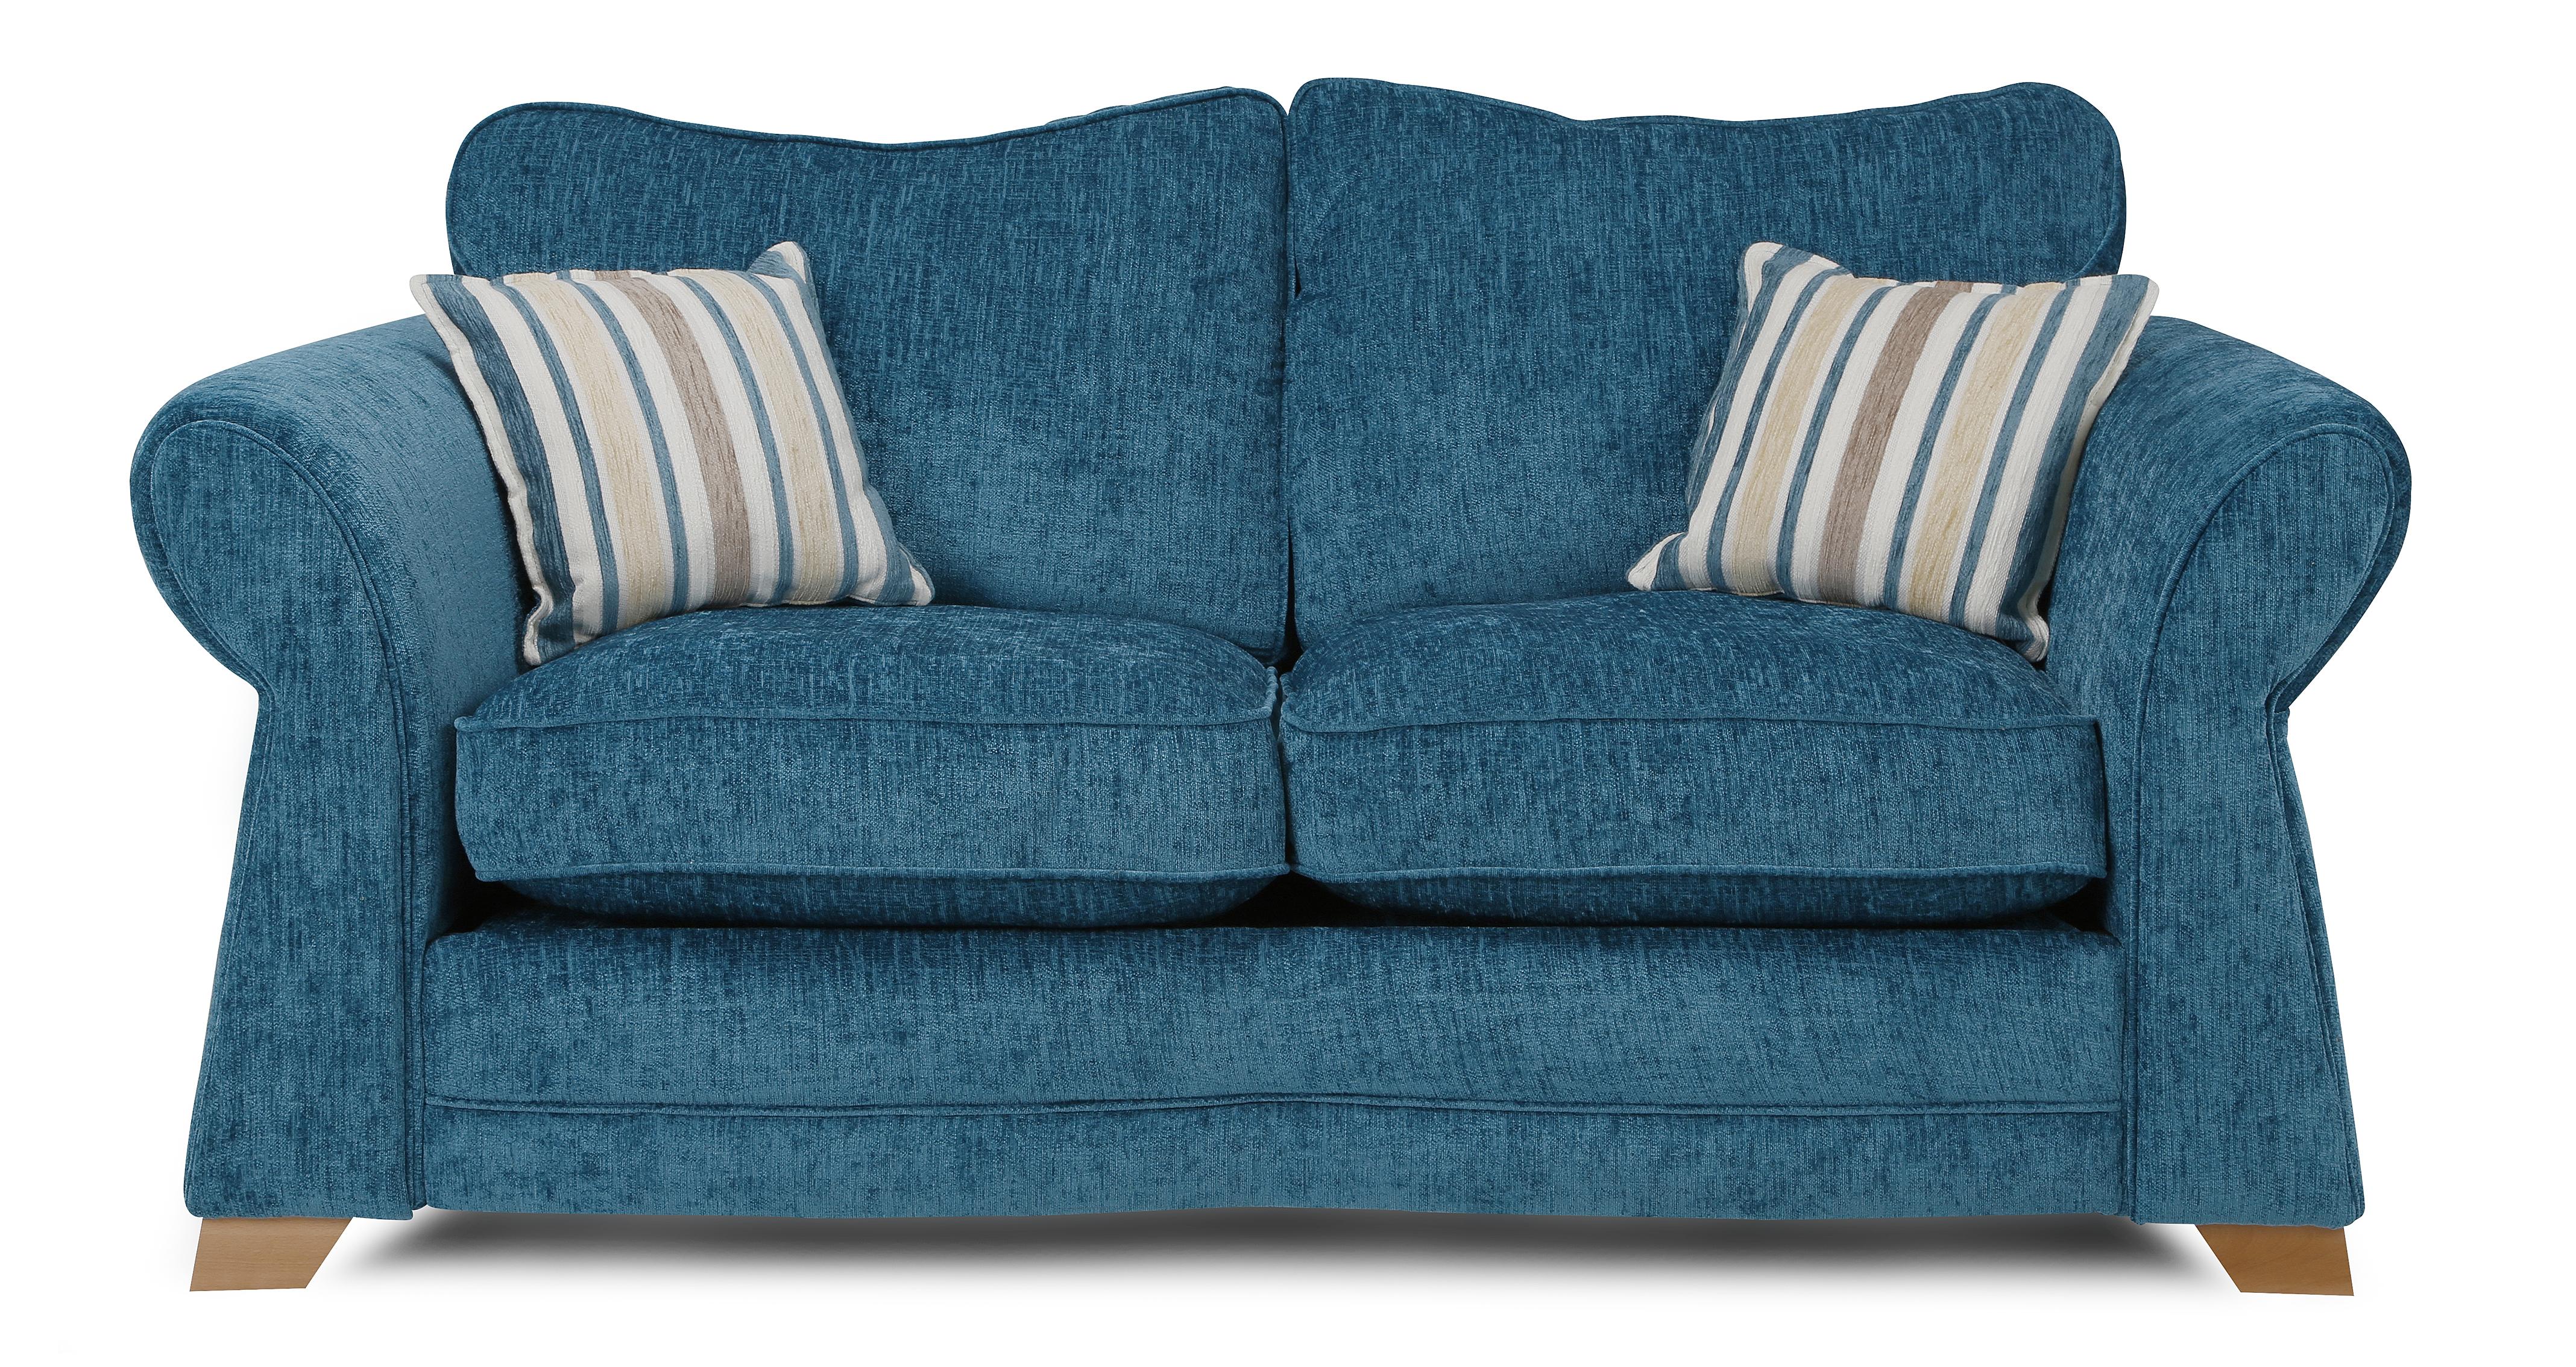 dfs teal sofa bed